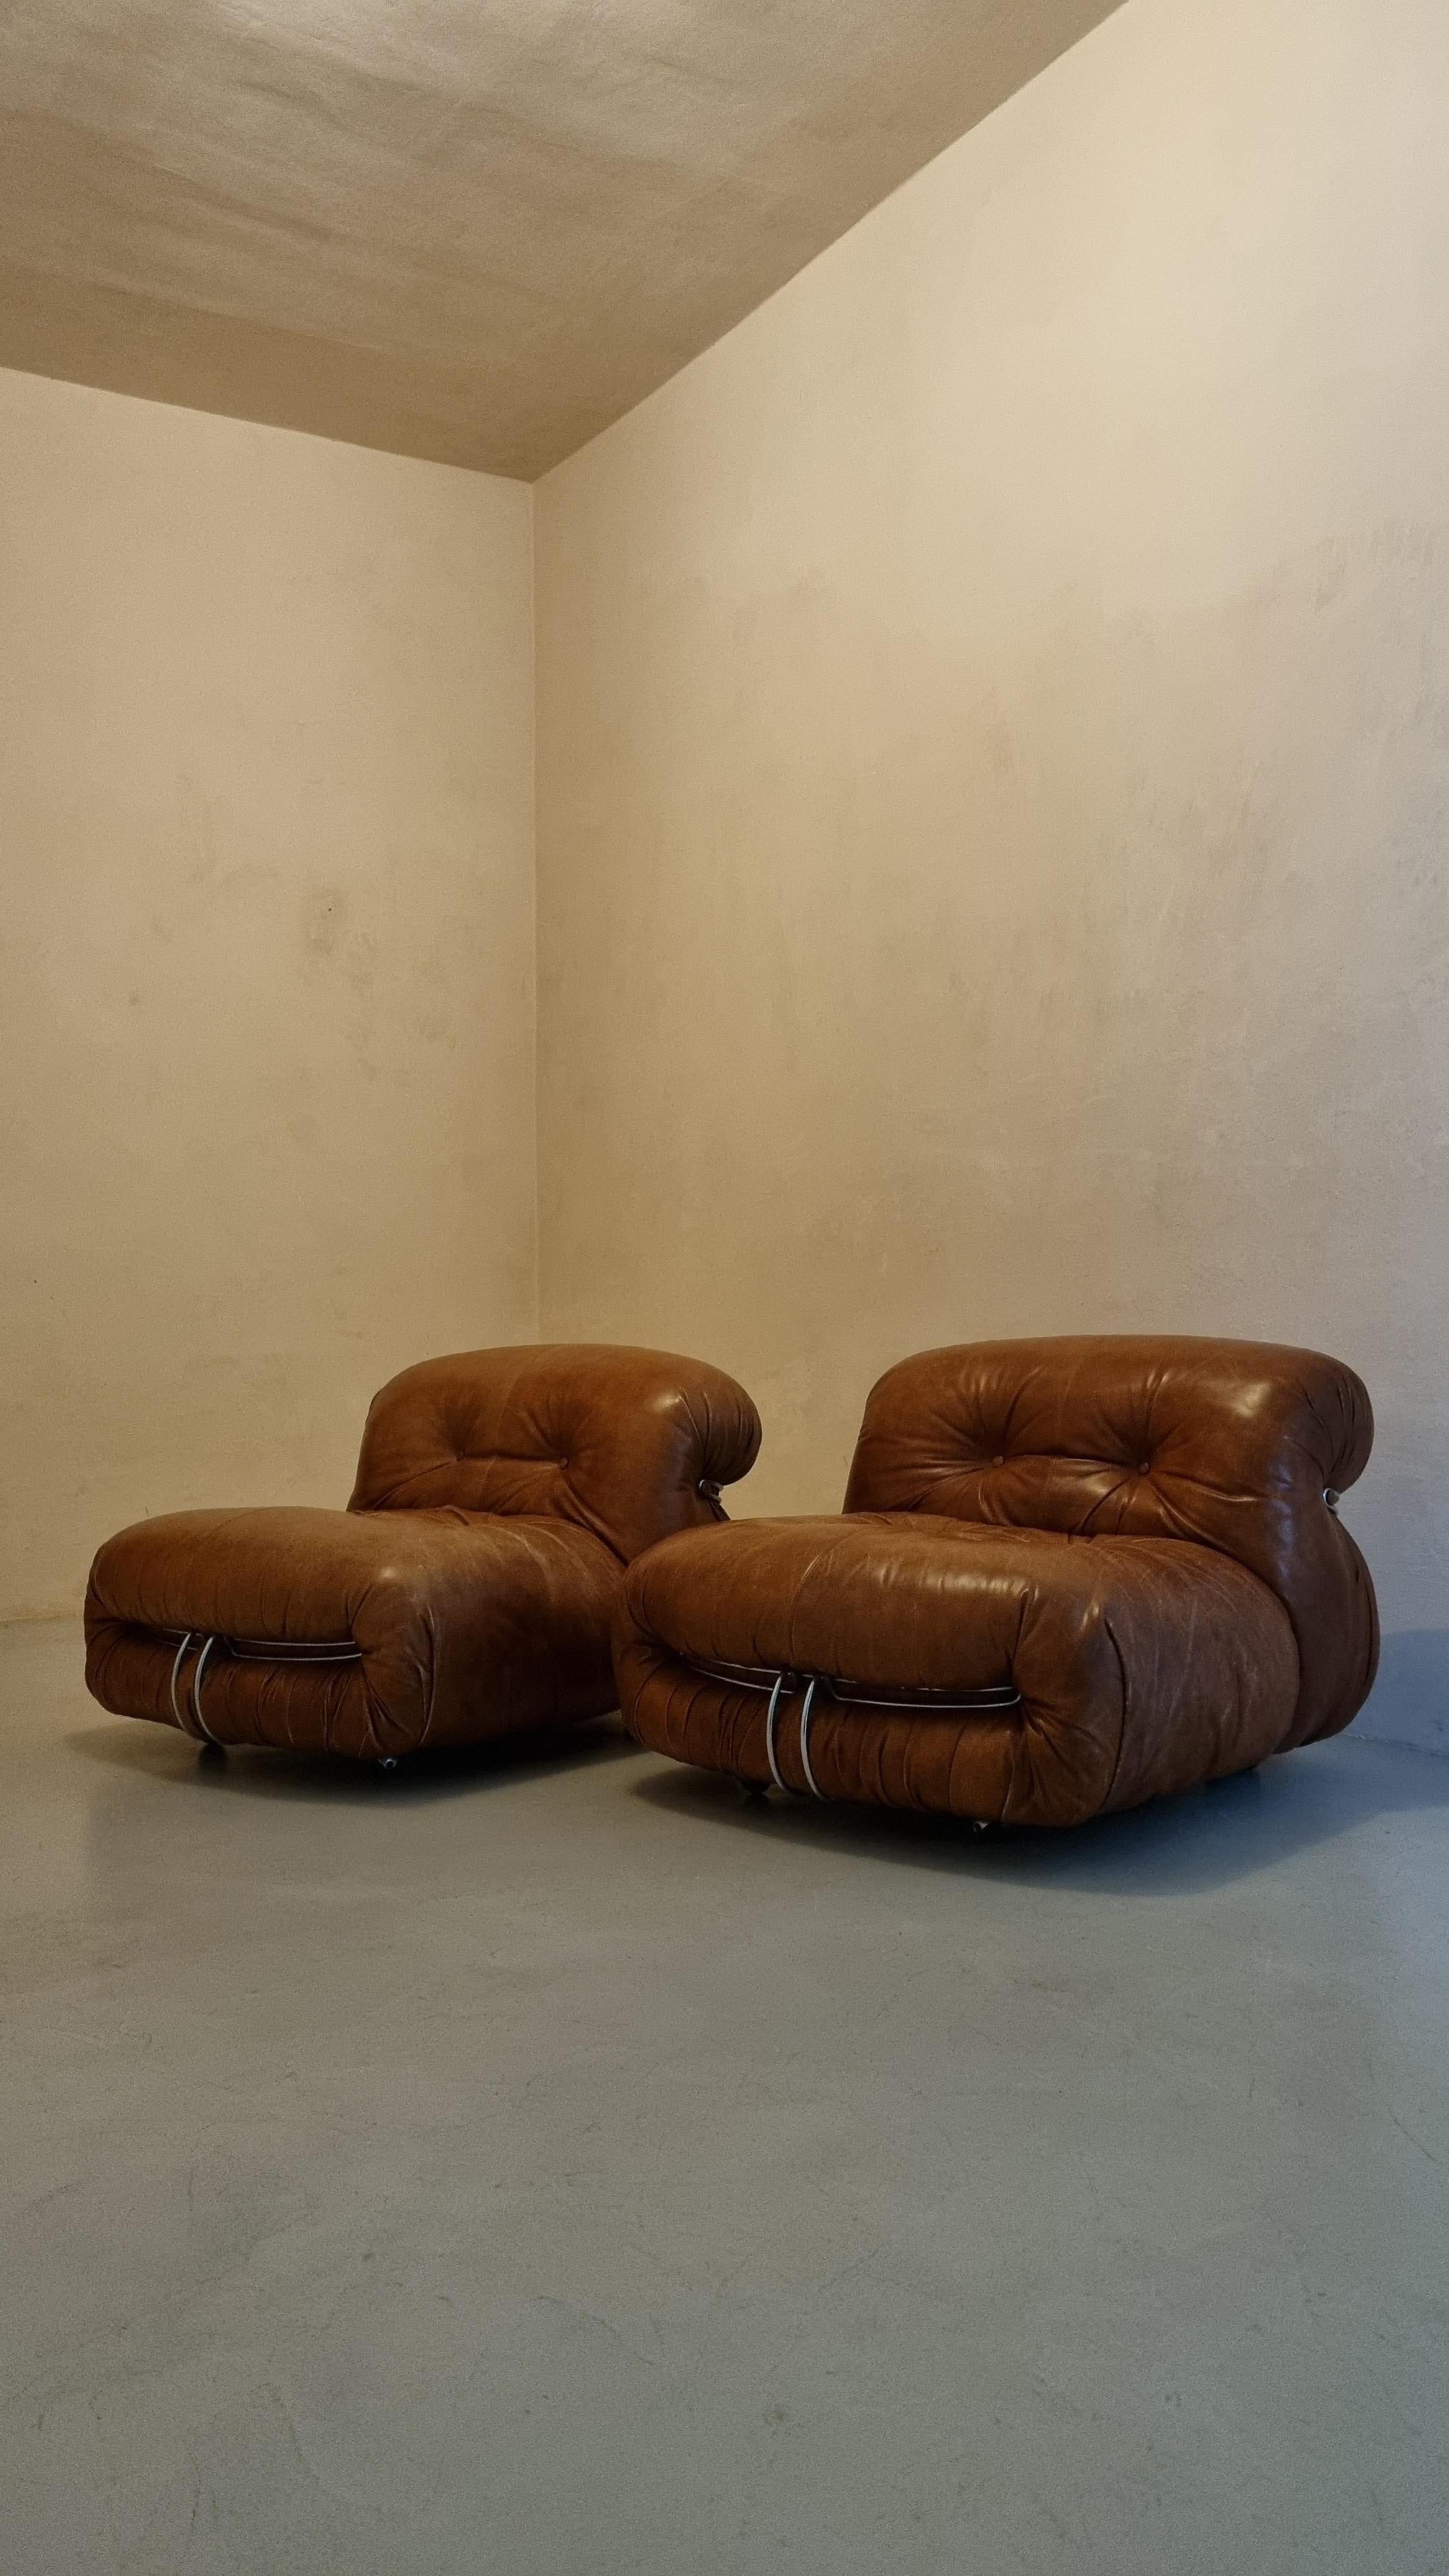 Set of 2 armchairs mod. Soriana by Afra and Tobia Scarpa for Cassina 1969,  original leather.
A true icon of style, Soriana, characterized by its abundant curves, was designed in 1969 by Afra and Tobia Scarpa and received a Compasso d'Oro the